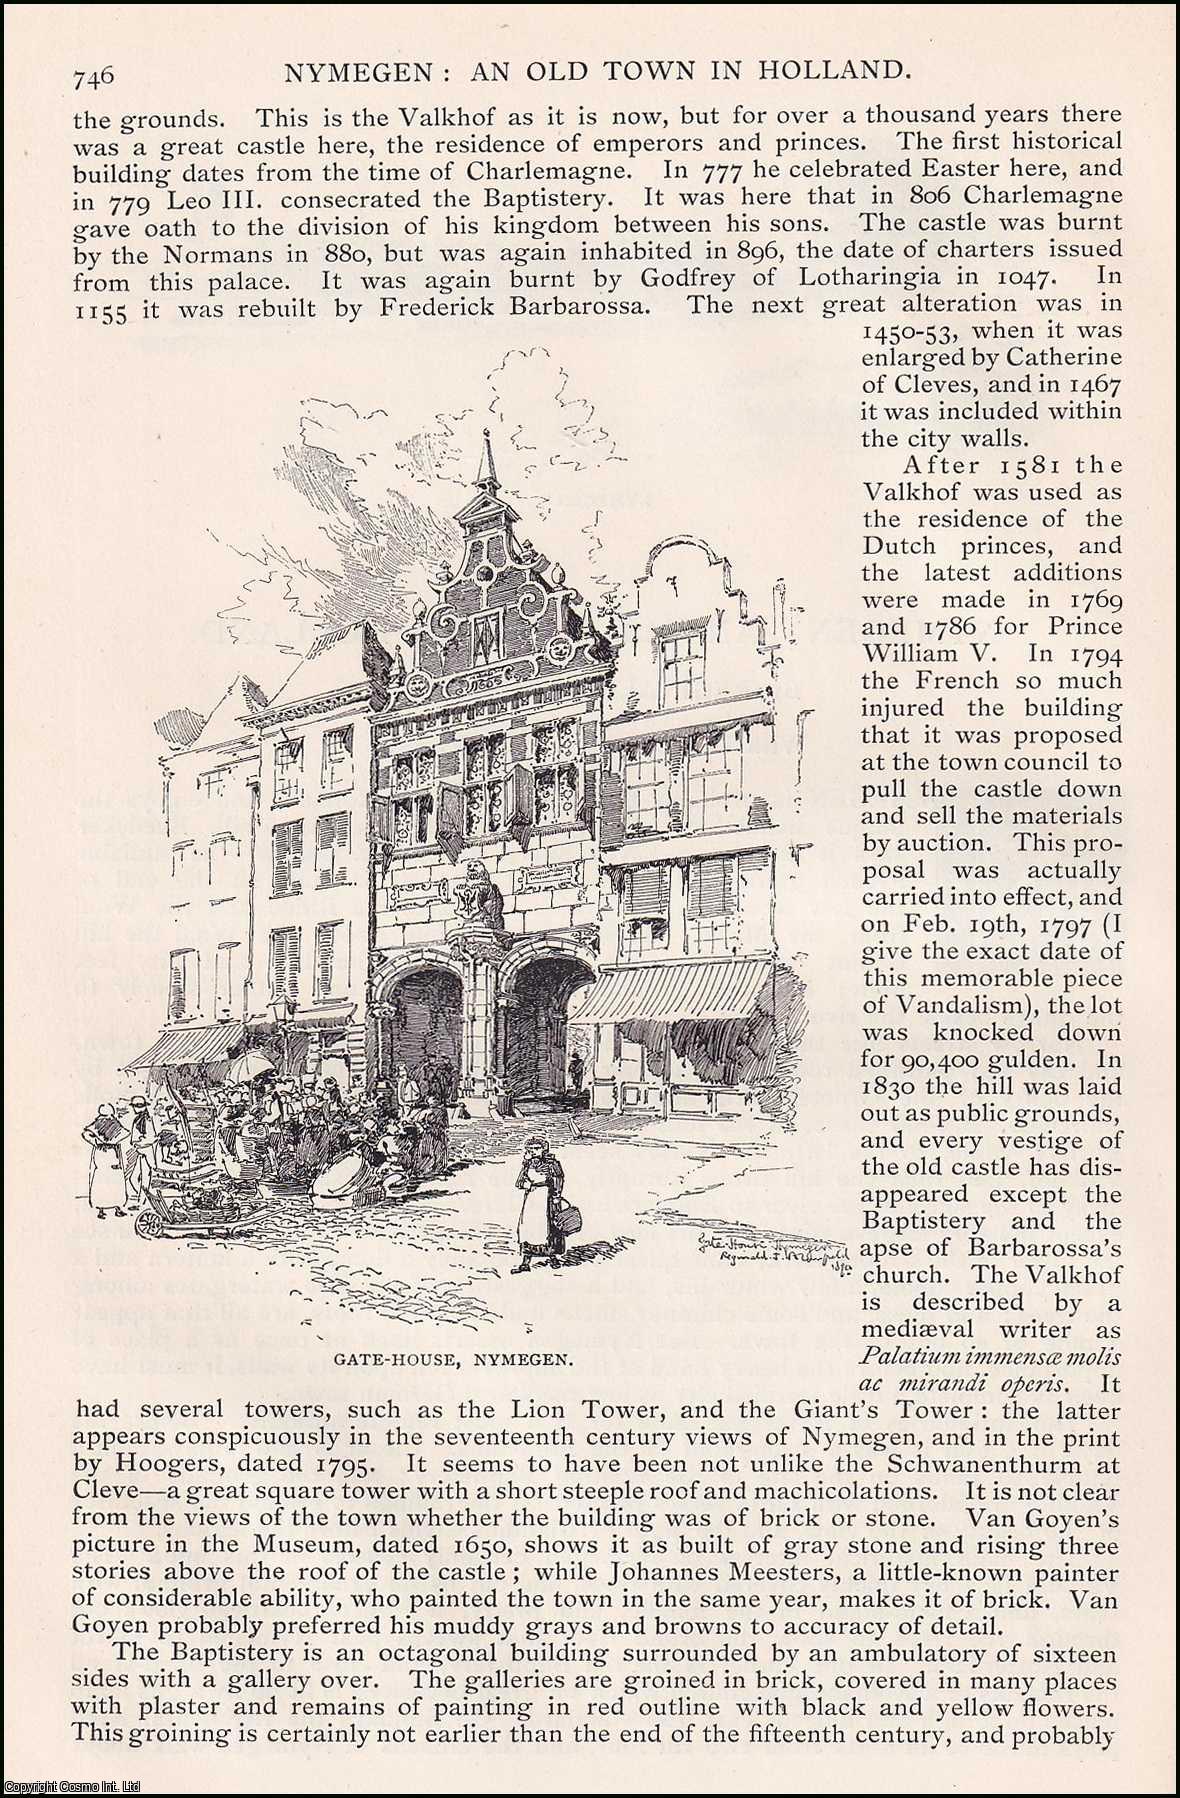 Written and Illustrated by Reginald Blomfield - Nymegen: an Old Town in Holland. An original article from the English Illustrated Magazine, 1891.